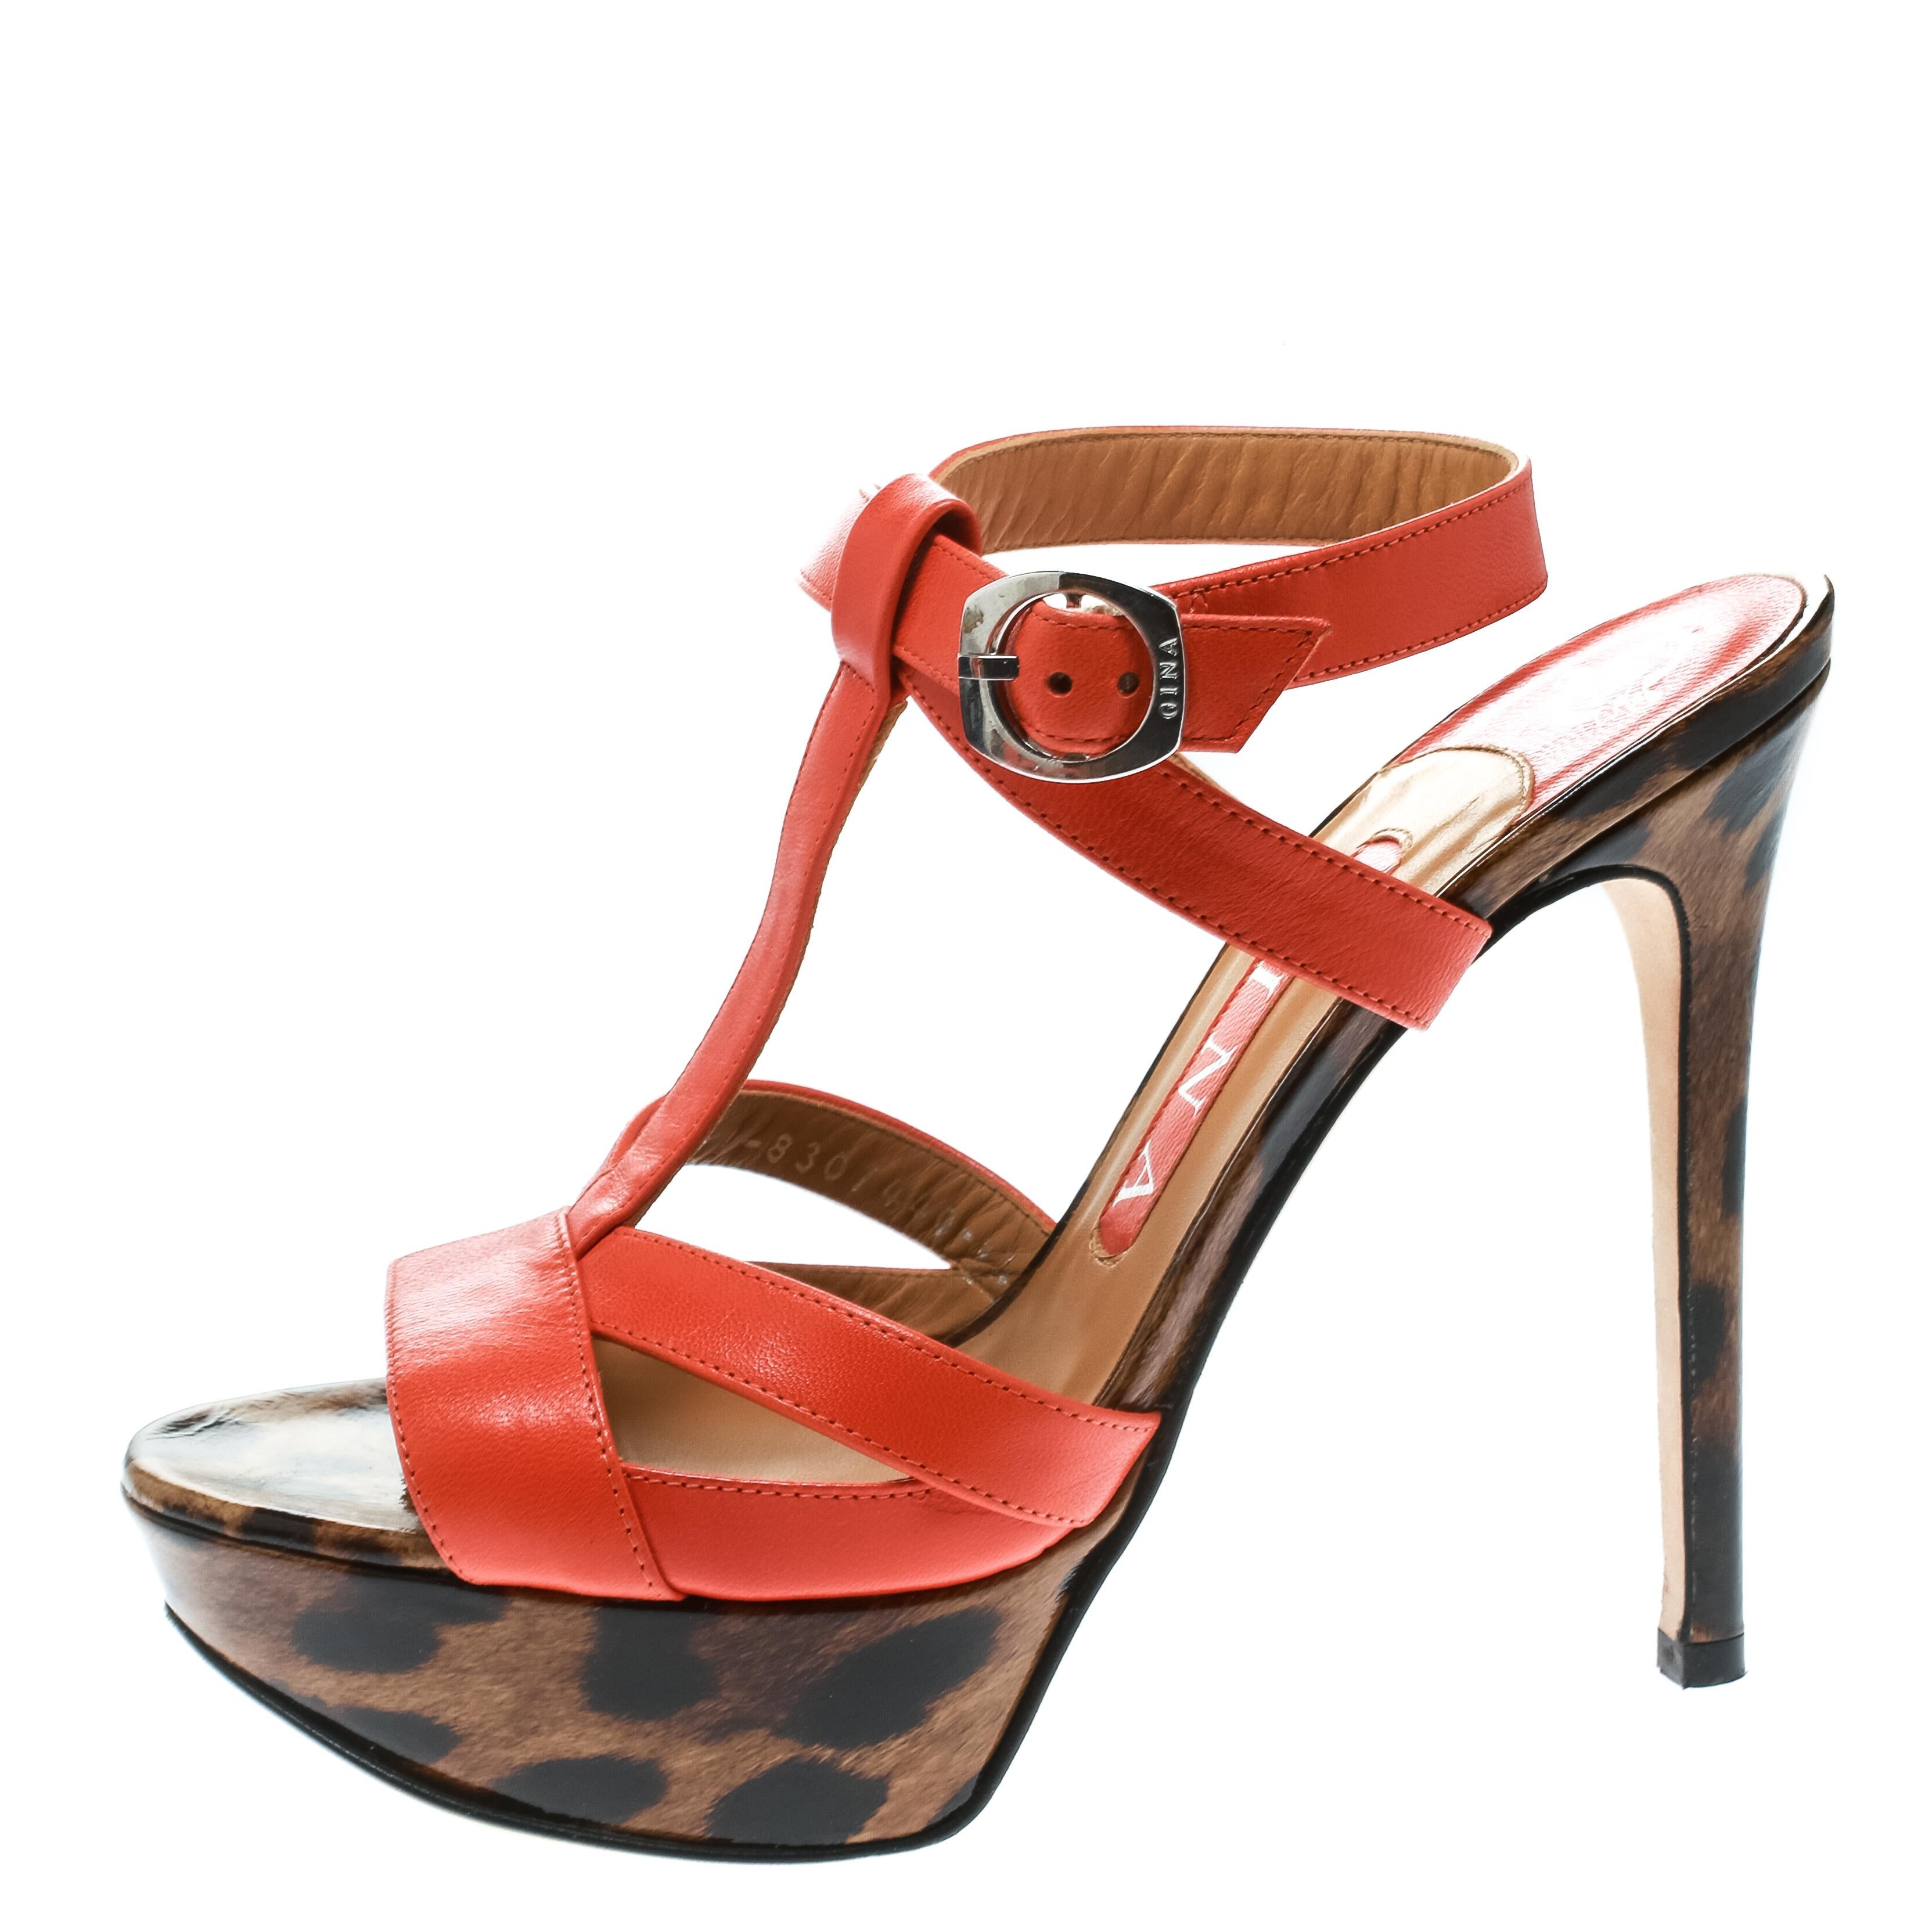 The right shoes do not only make a woman look fabulous but also gives her confidence. These Gina sandals bring elegance and wonder in their design of orange leather straps, ankle buckle fastenings and the leopard print on the platforms and